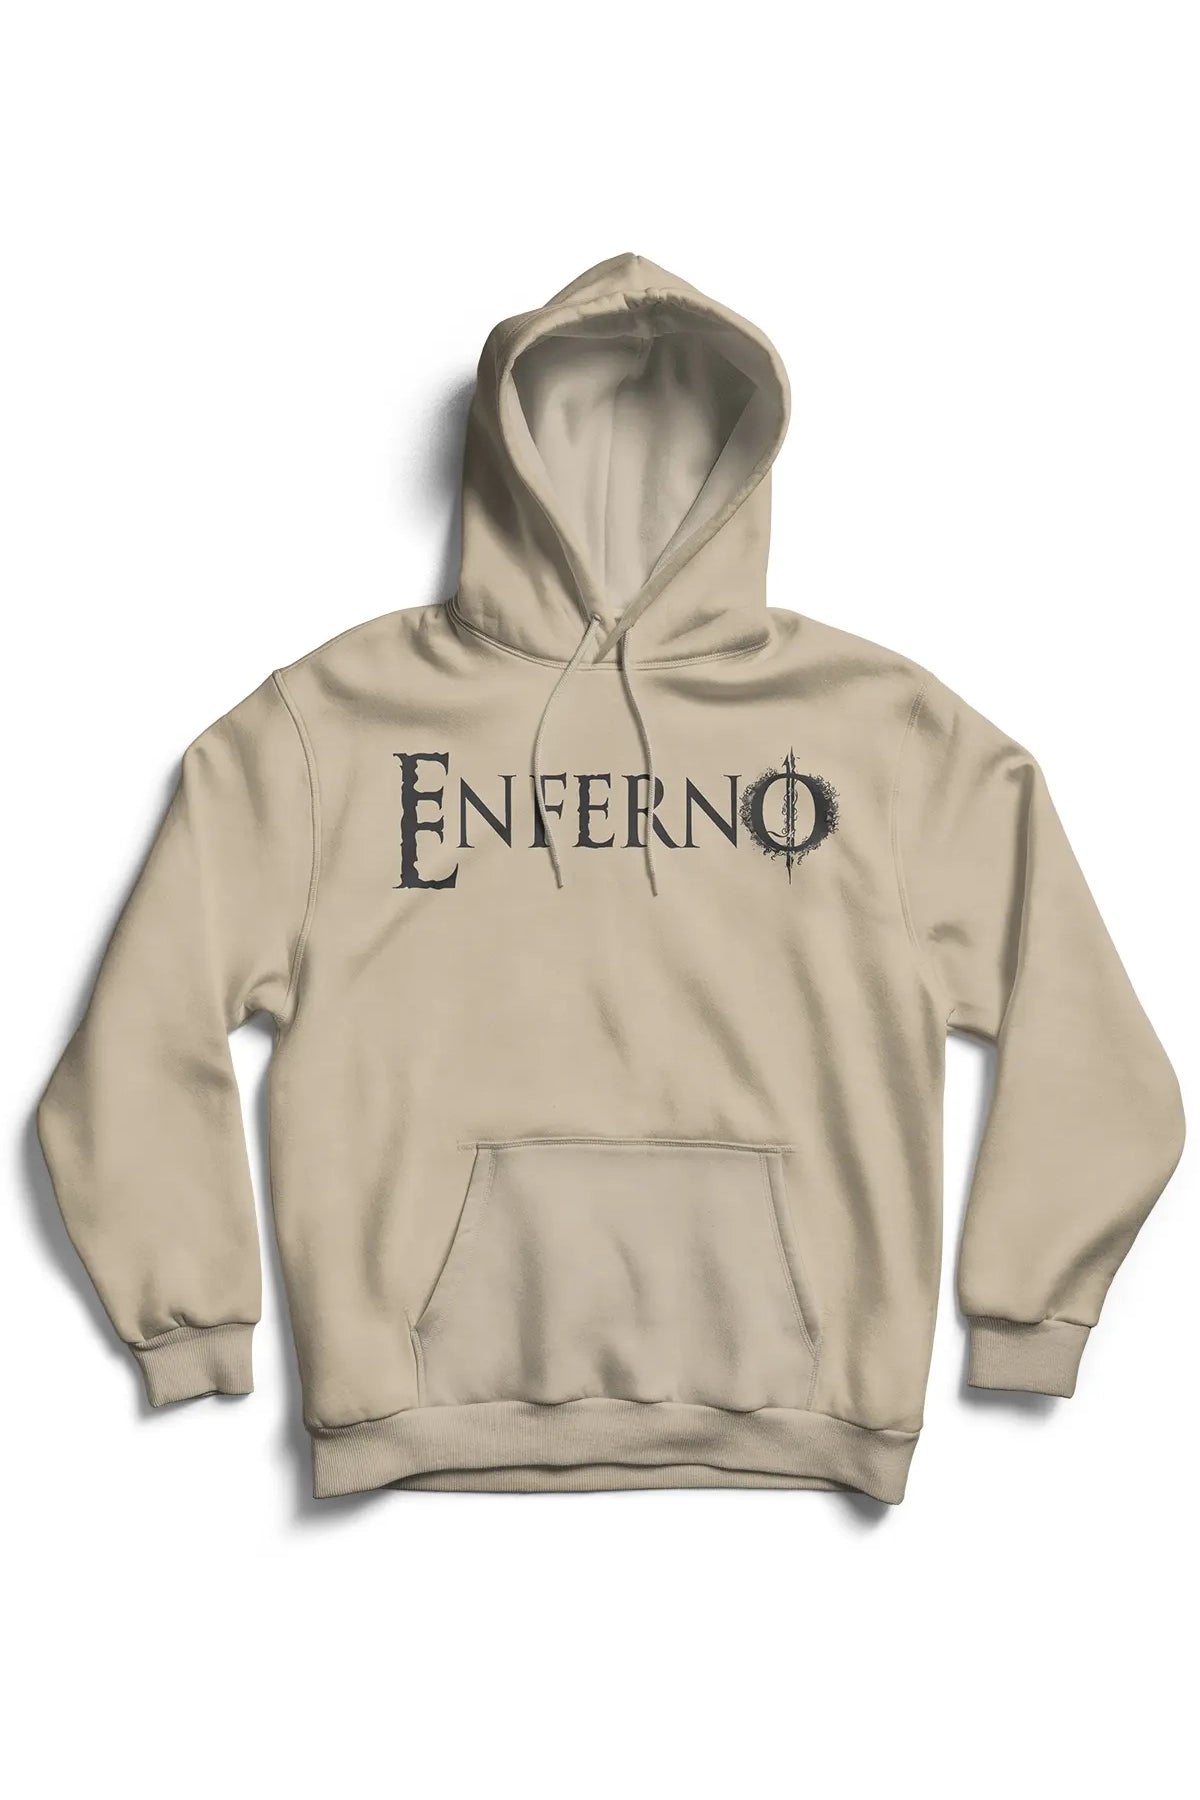 The Enferno Classic Logo Hoodie in Sandstone.